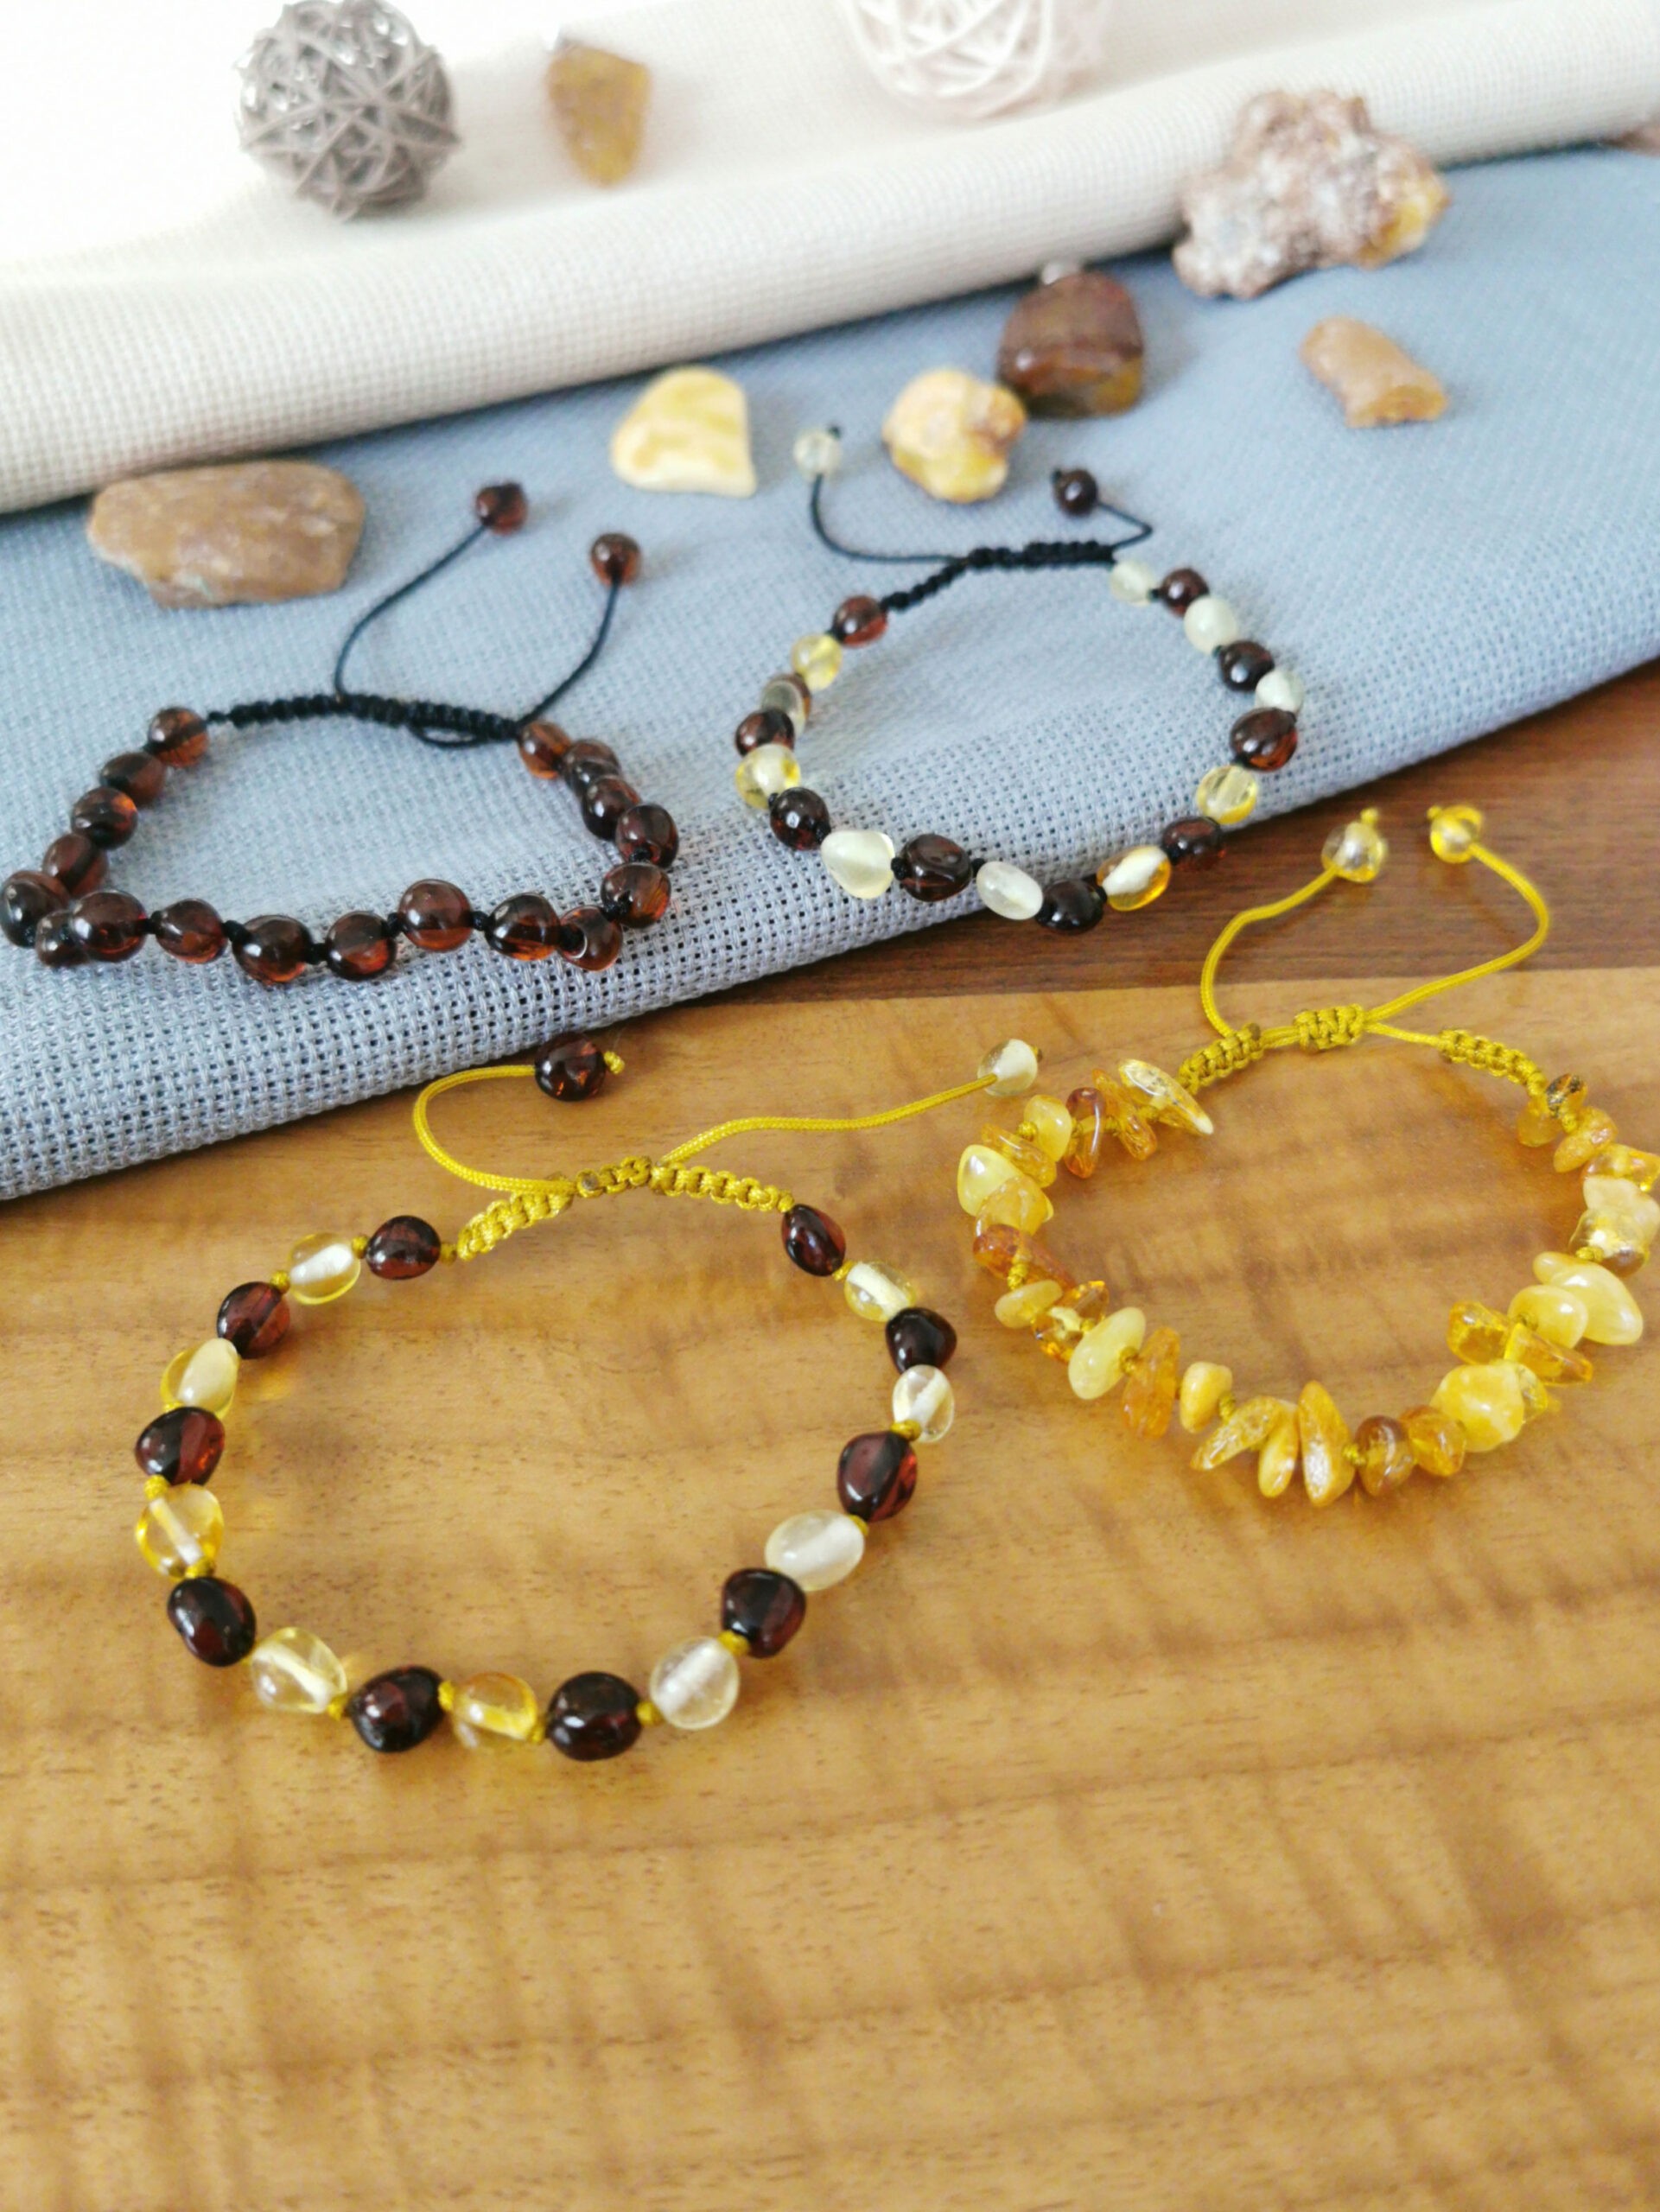 Buy Baltic Amber for Africa Cognac Teething Necklace Online | Faithful to  Nature